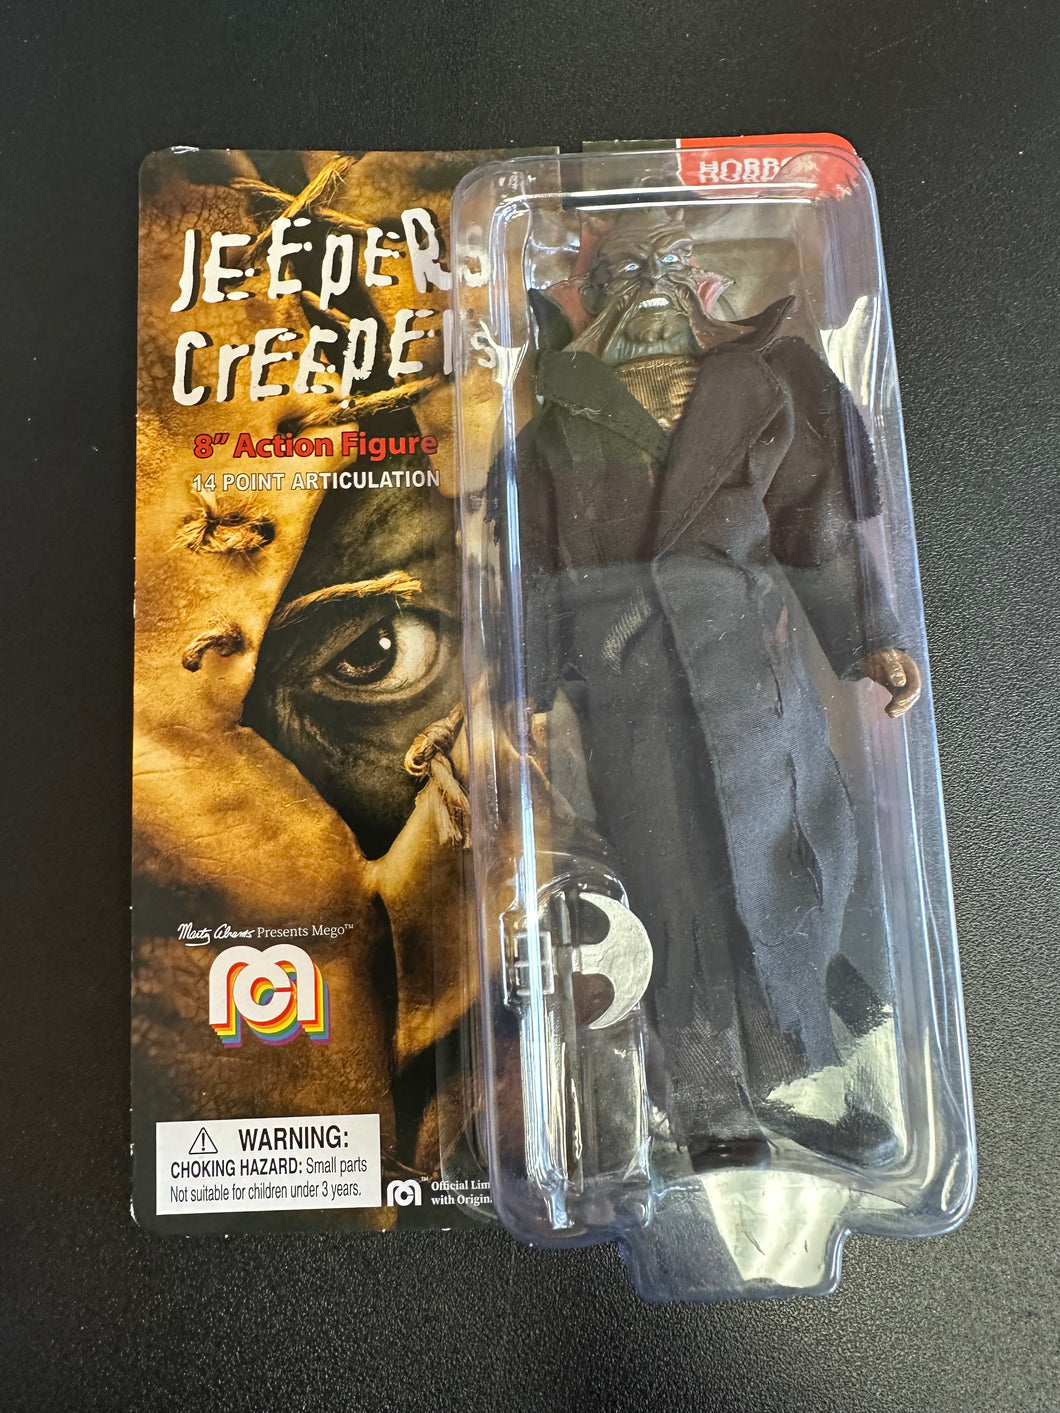 MEGO JEEPERS CREEPERS FIGURE OUTFIT VARIANT